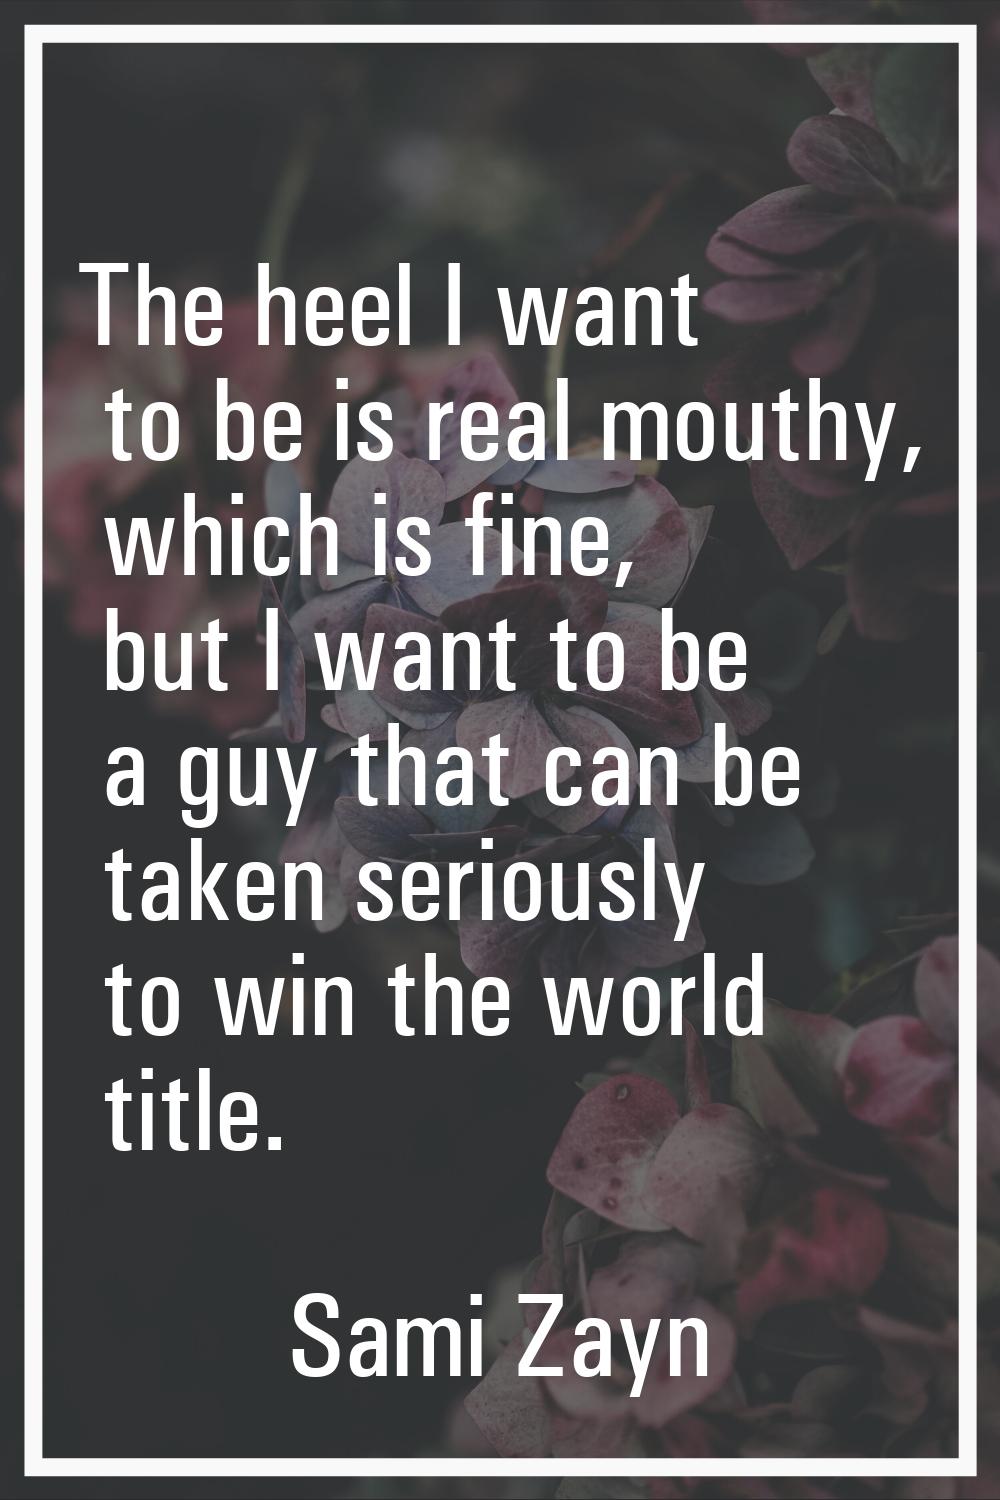 The heel I want to be is real mouthy, which is fine, but I want to be a guy that can be taken serio